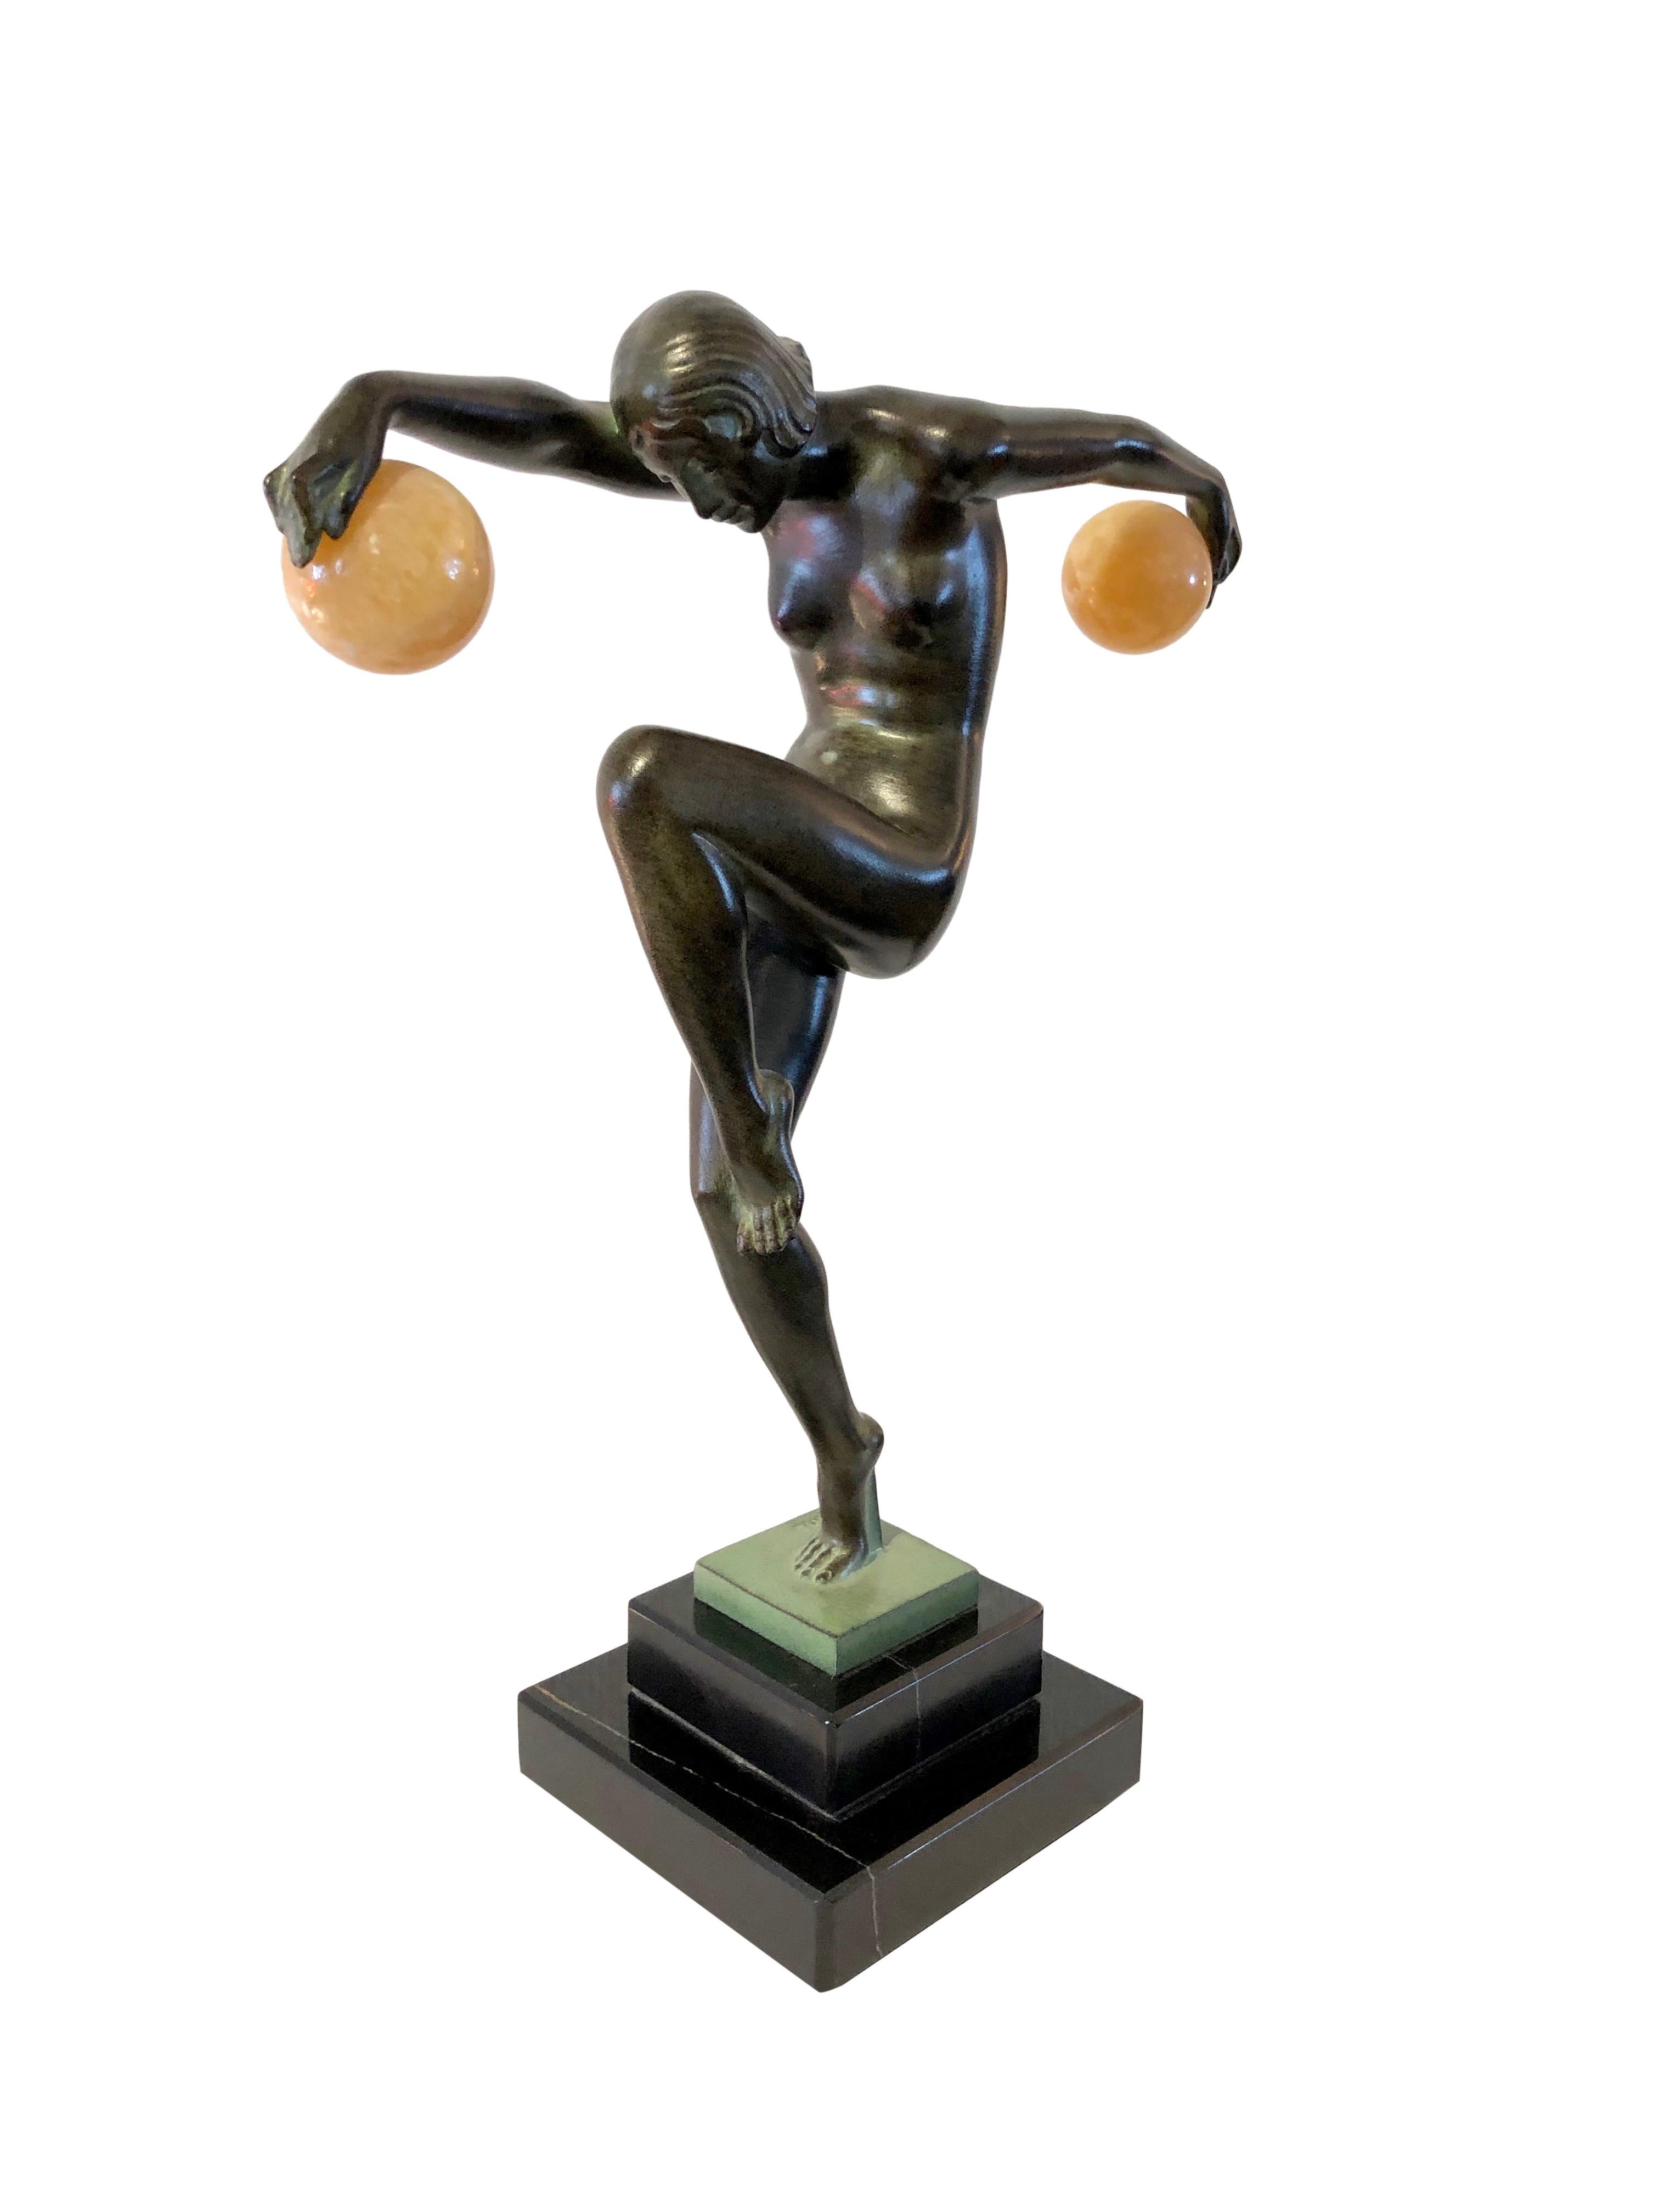 Sculpture dancing lady 
Danseuse Aux Boules, Ball dancer 
Designed in France during the roaring 1920s by “Denis”
Original Max Le Verrier, signed 
Art Deco style, France

Material: 
Régule (Spelter) 
Green patina, handwork, so patina could be